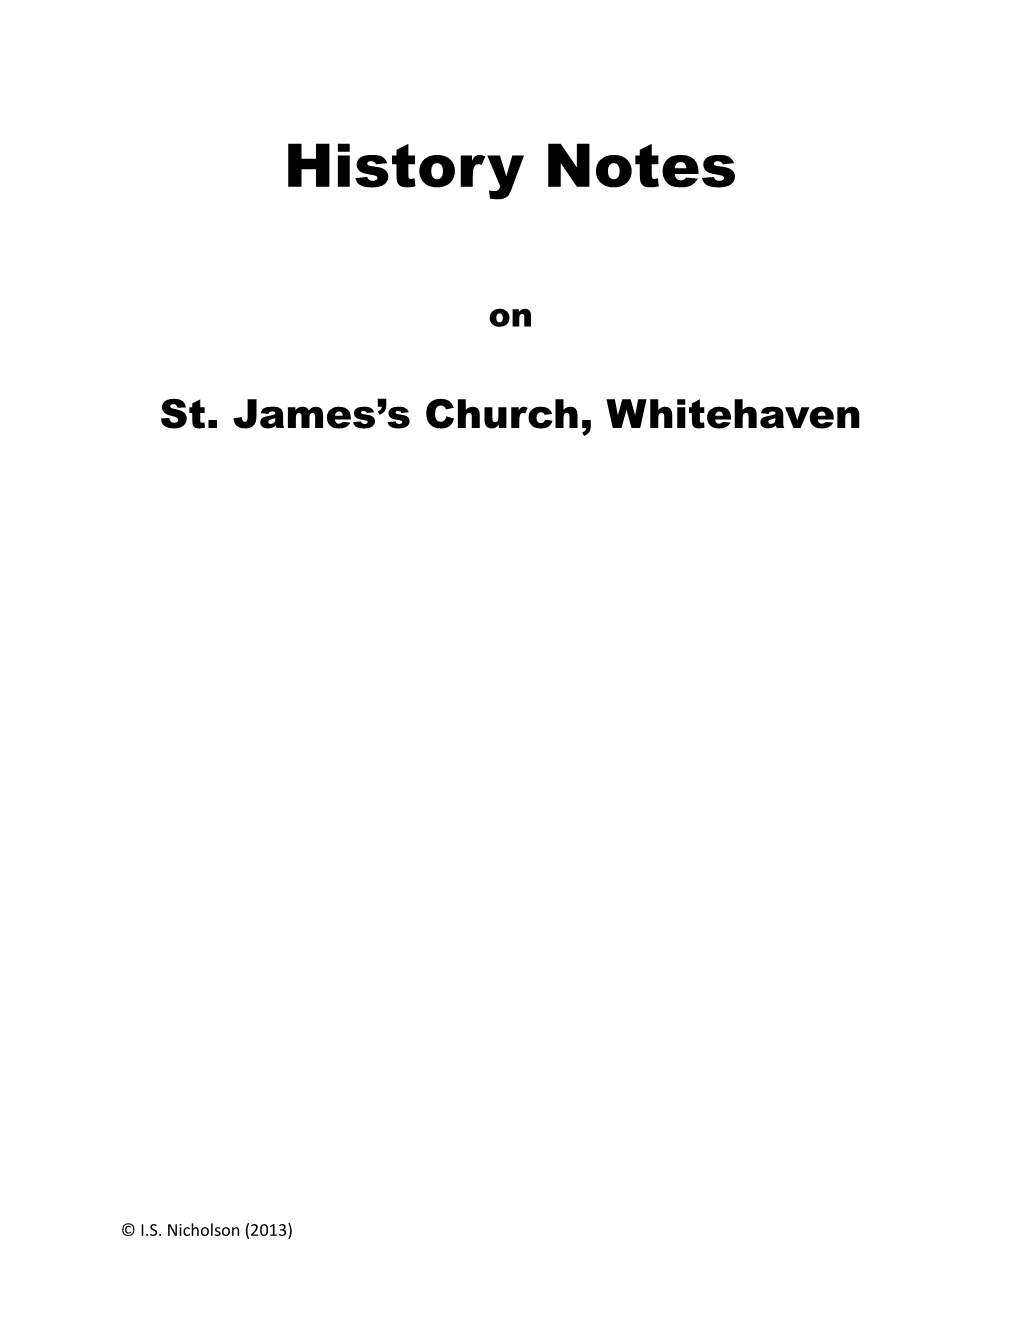 History Notes on St James's Church, Whitehaven